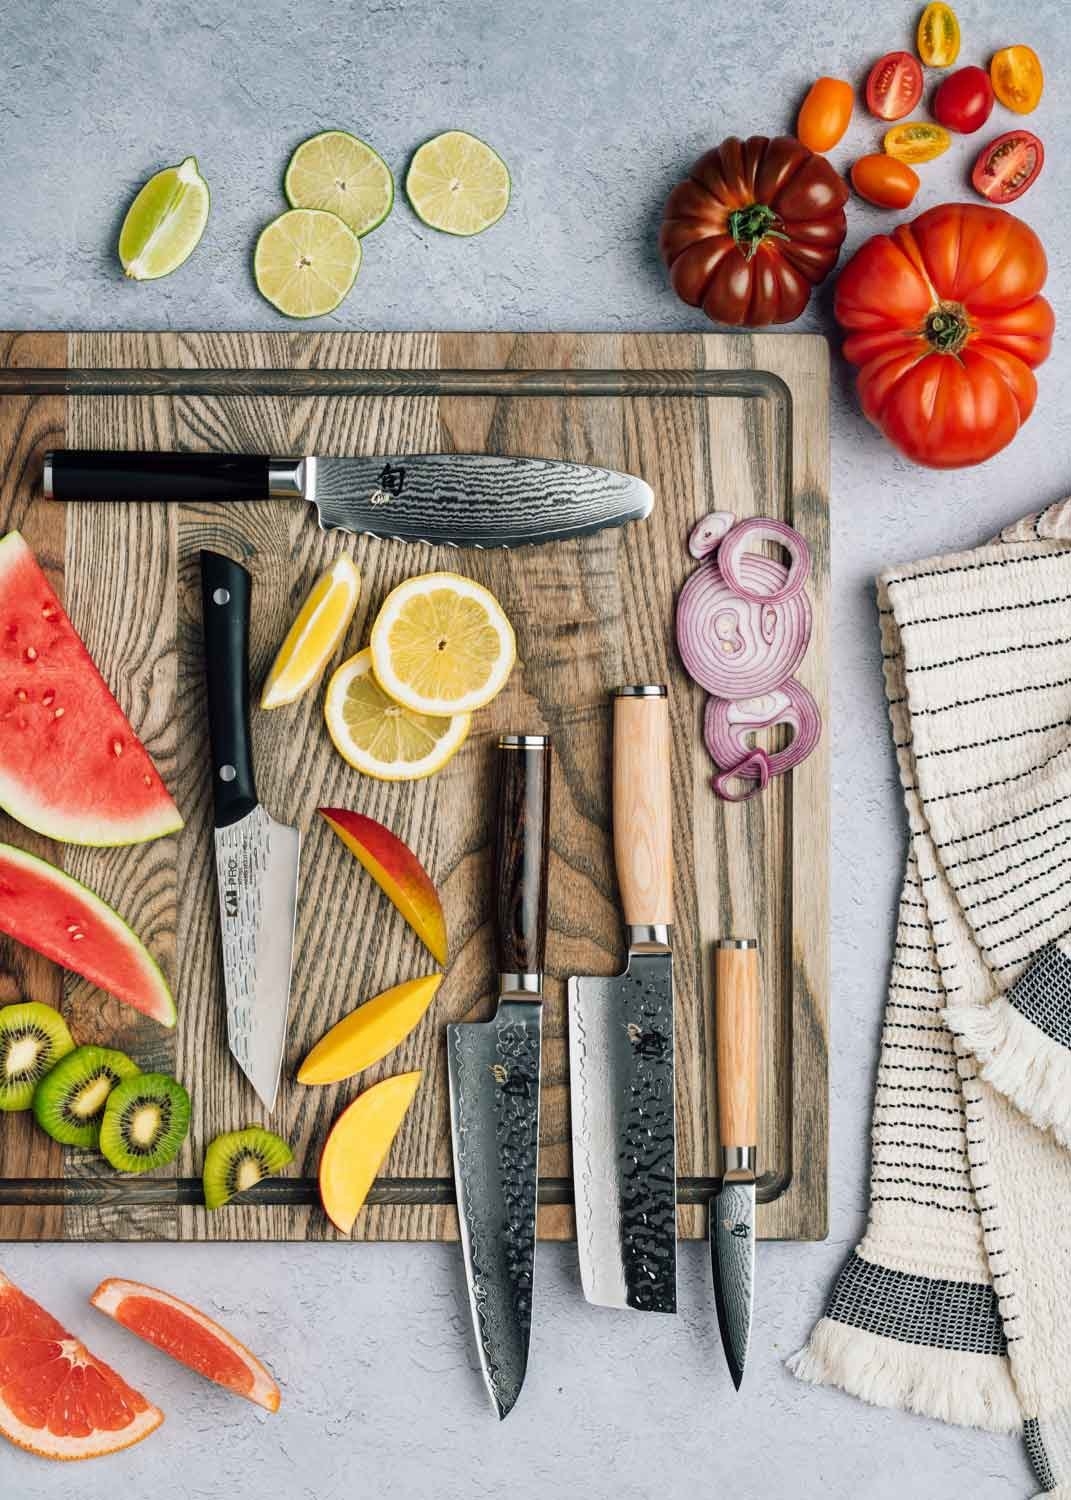 Cutting board with fruits and vegetables along with five different knives